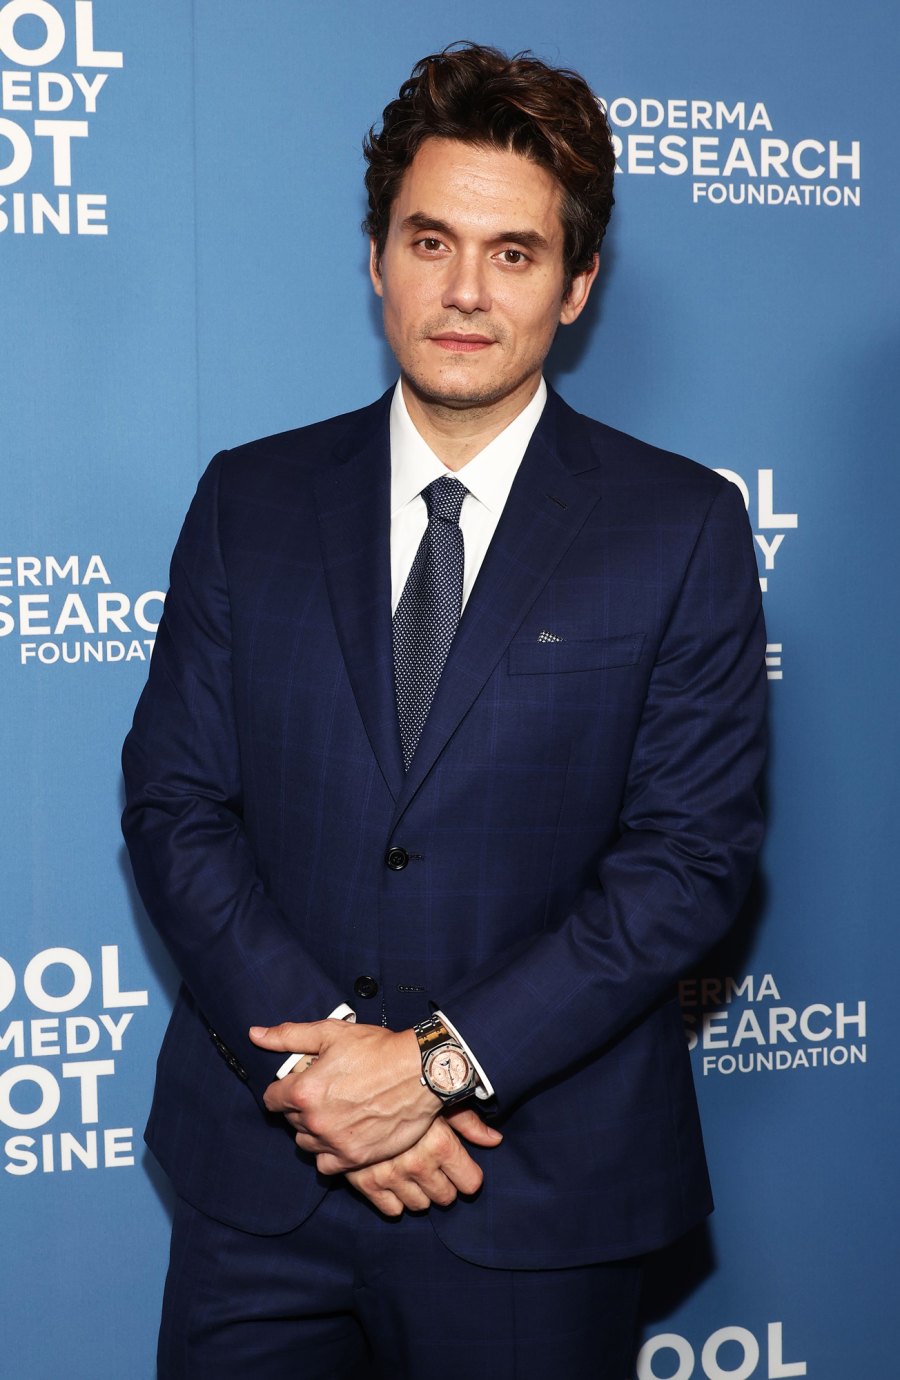 John Mayer Gives Dating Update After Getting Sober